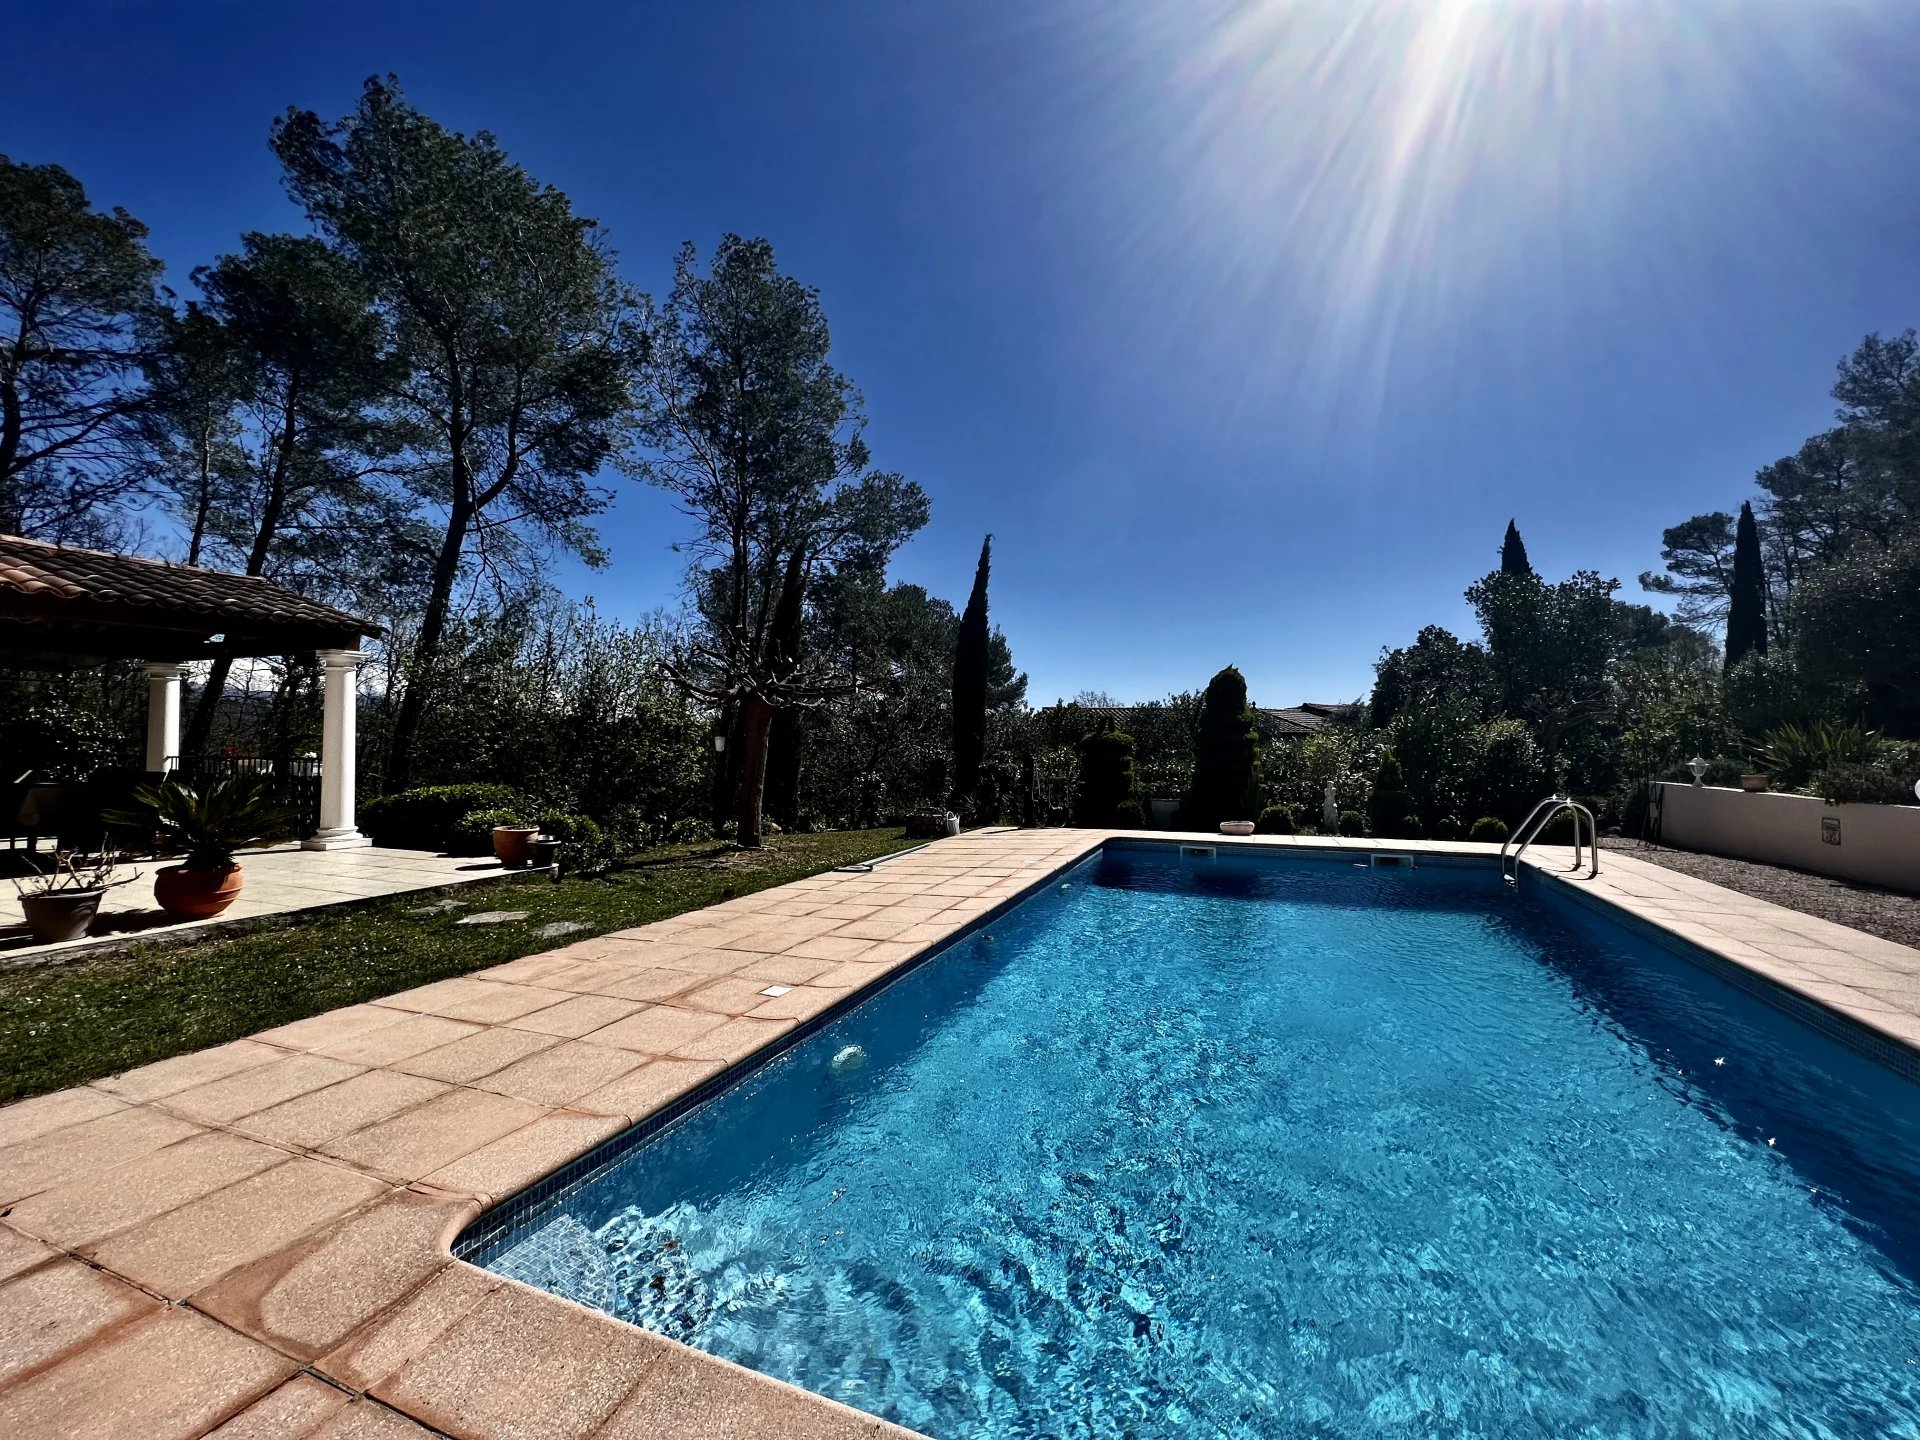 For sale in Fayence 3 bedrooms villa in a calm area and close to commodities